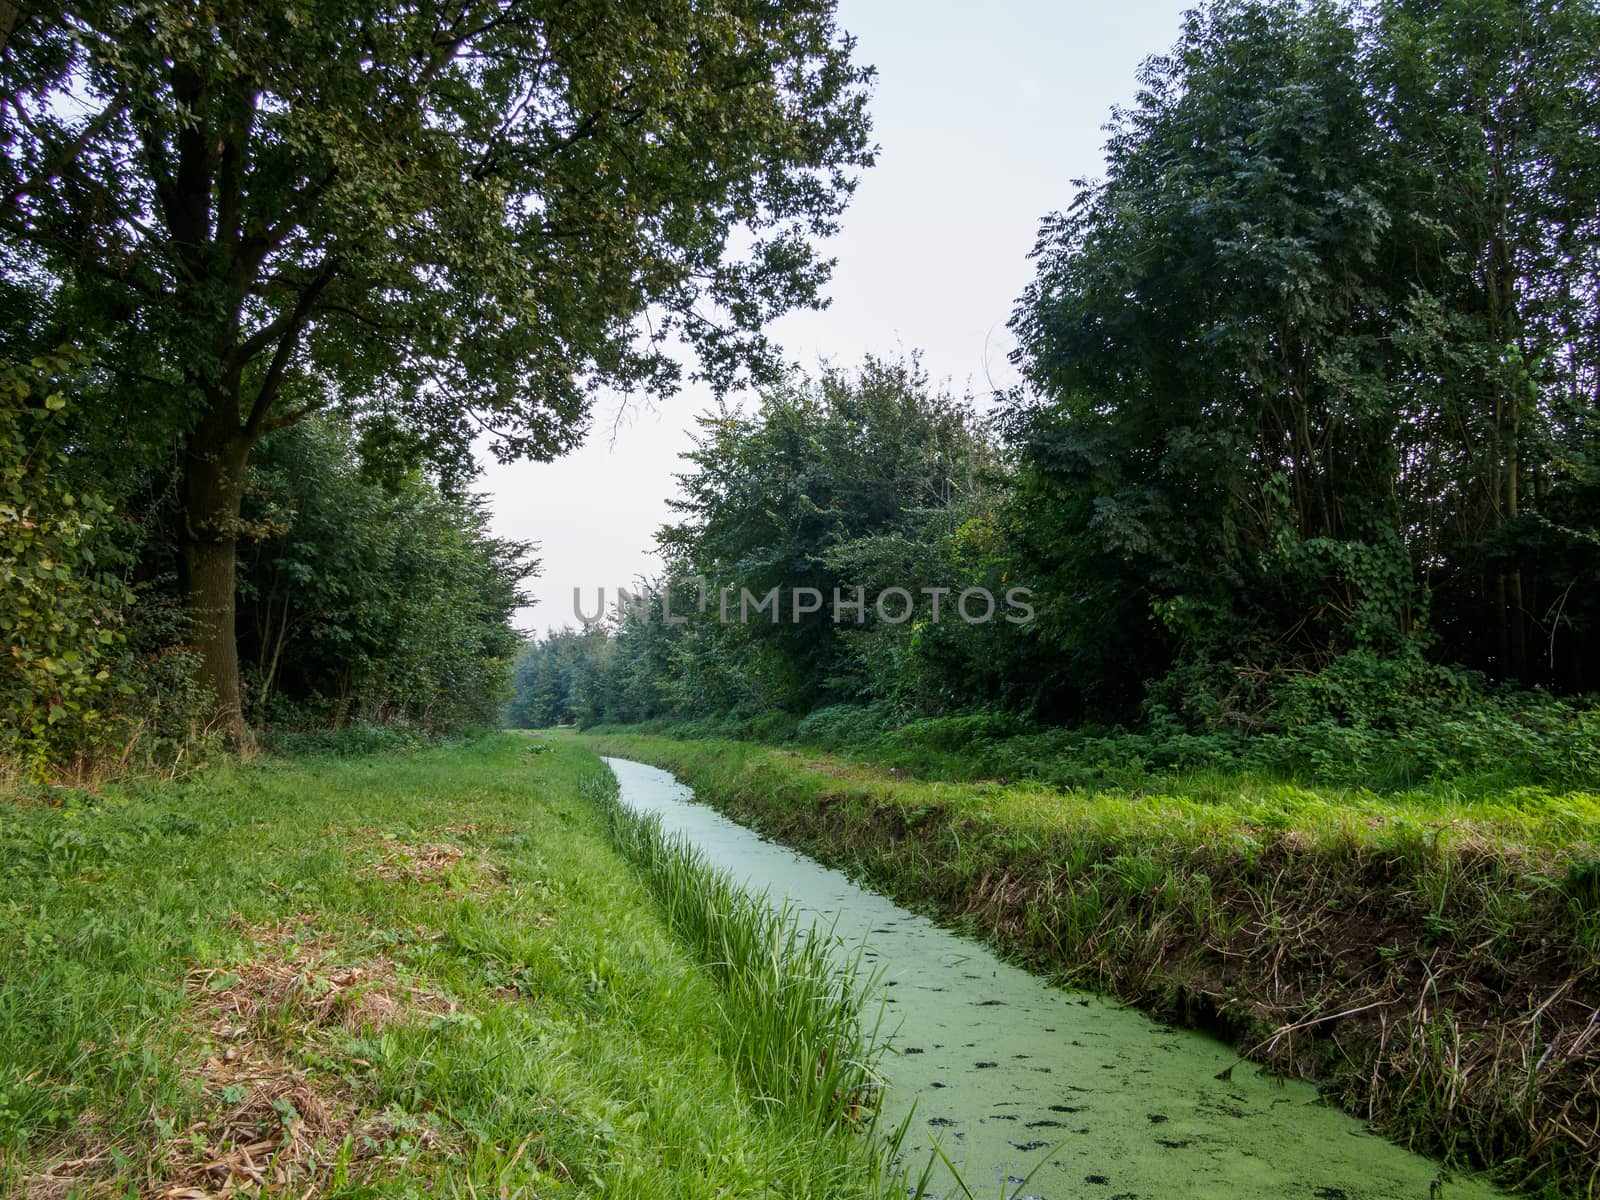 Duckweed covered ditch through dutch fields